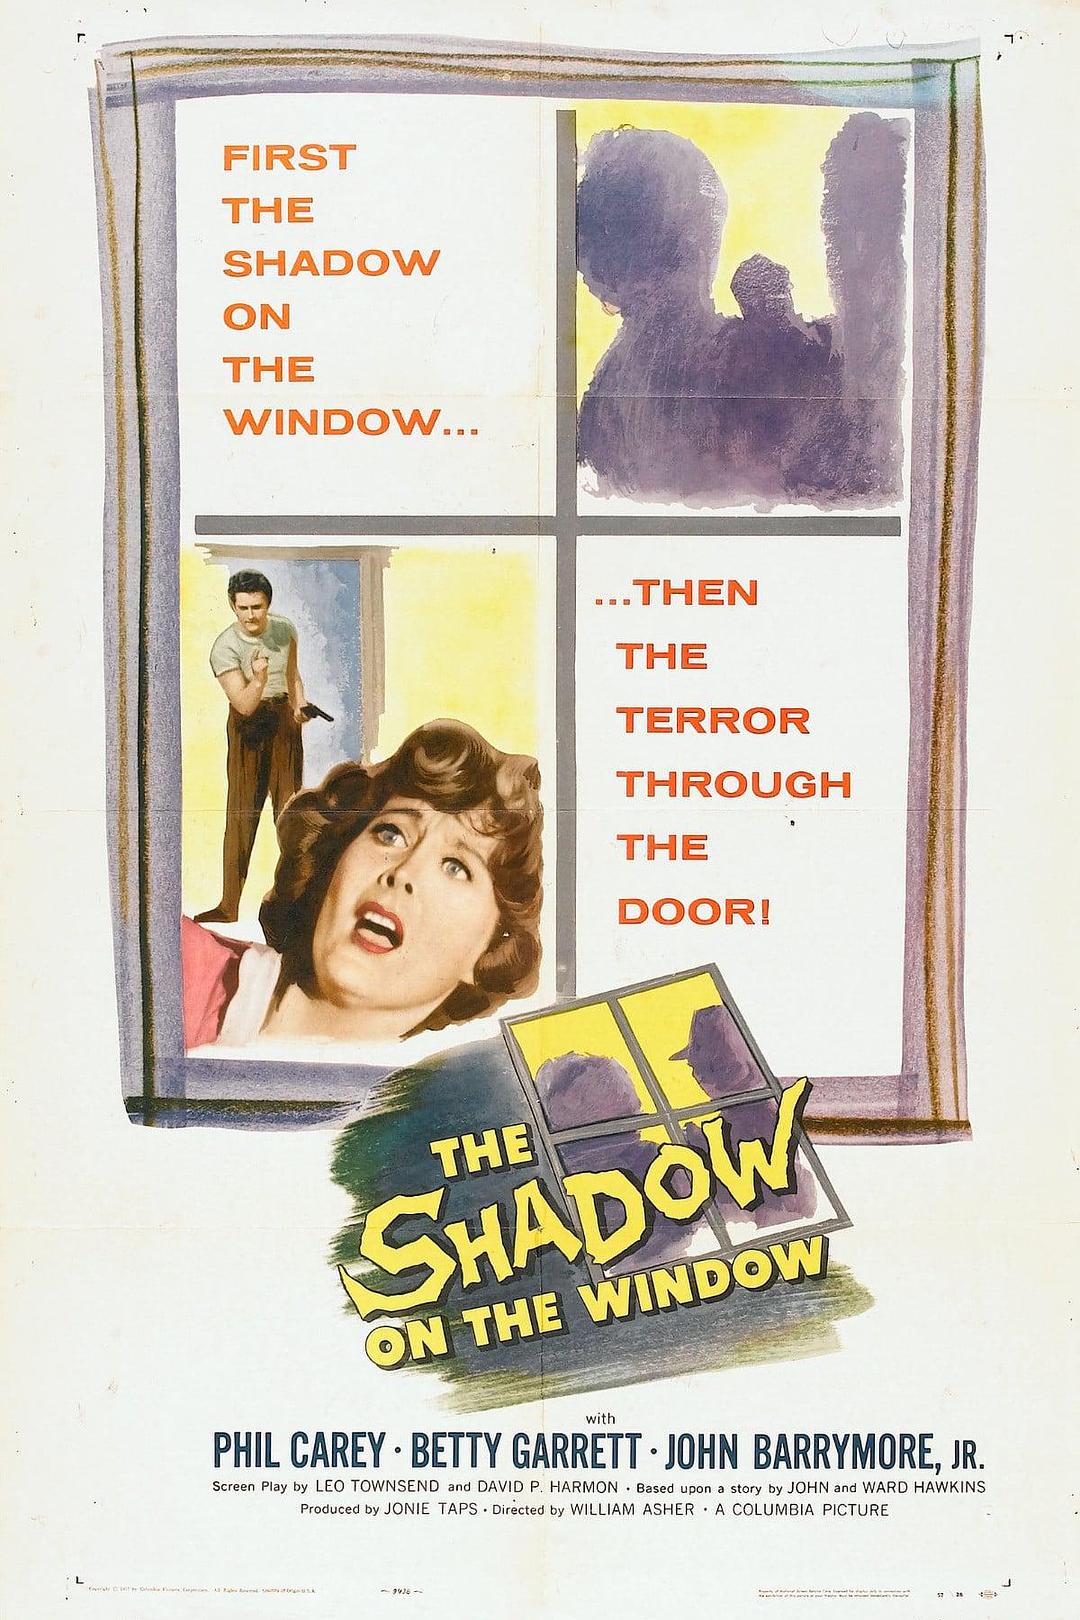 ǰӰ The.Shadow.on.the.Window.1957.1080p.BluRay.REMUX.AVC.DTS-HD.MA.1.0-FGT 10.7-1.png